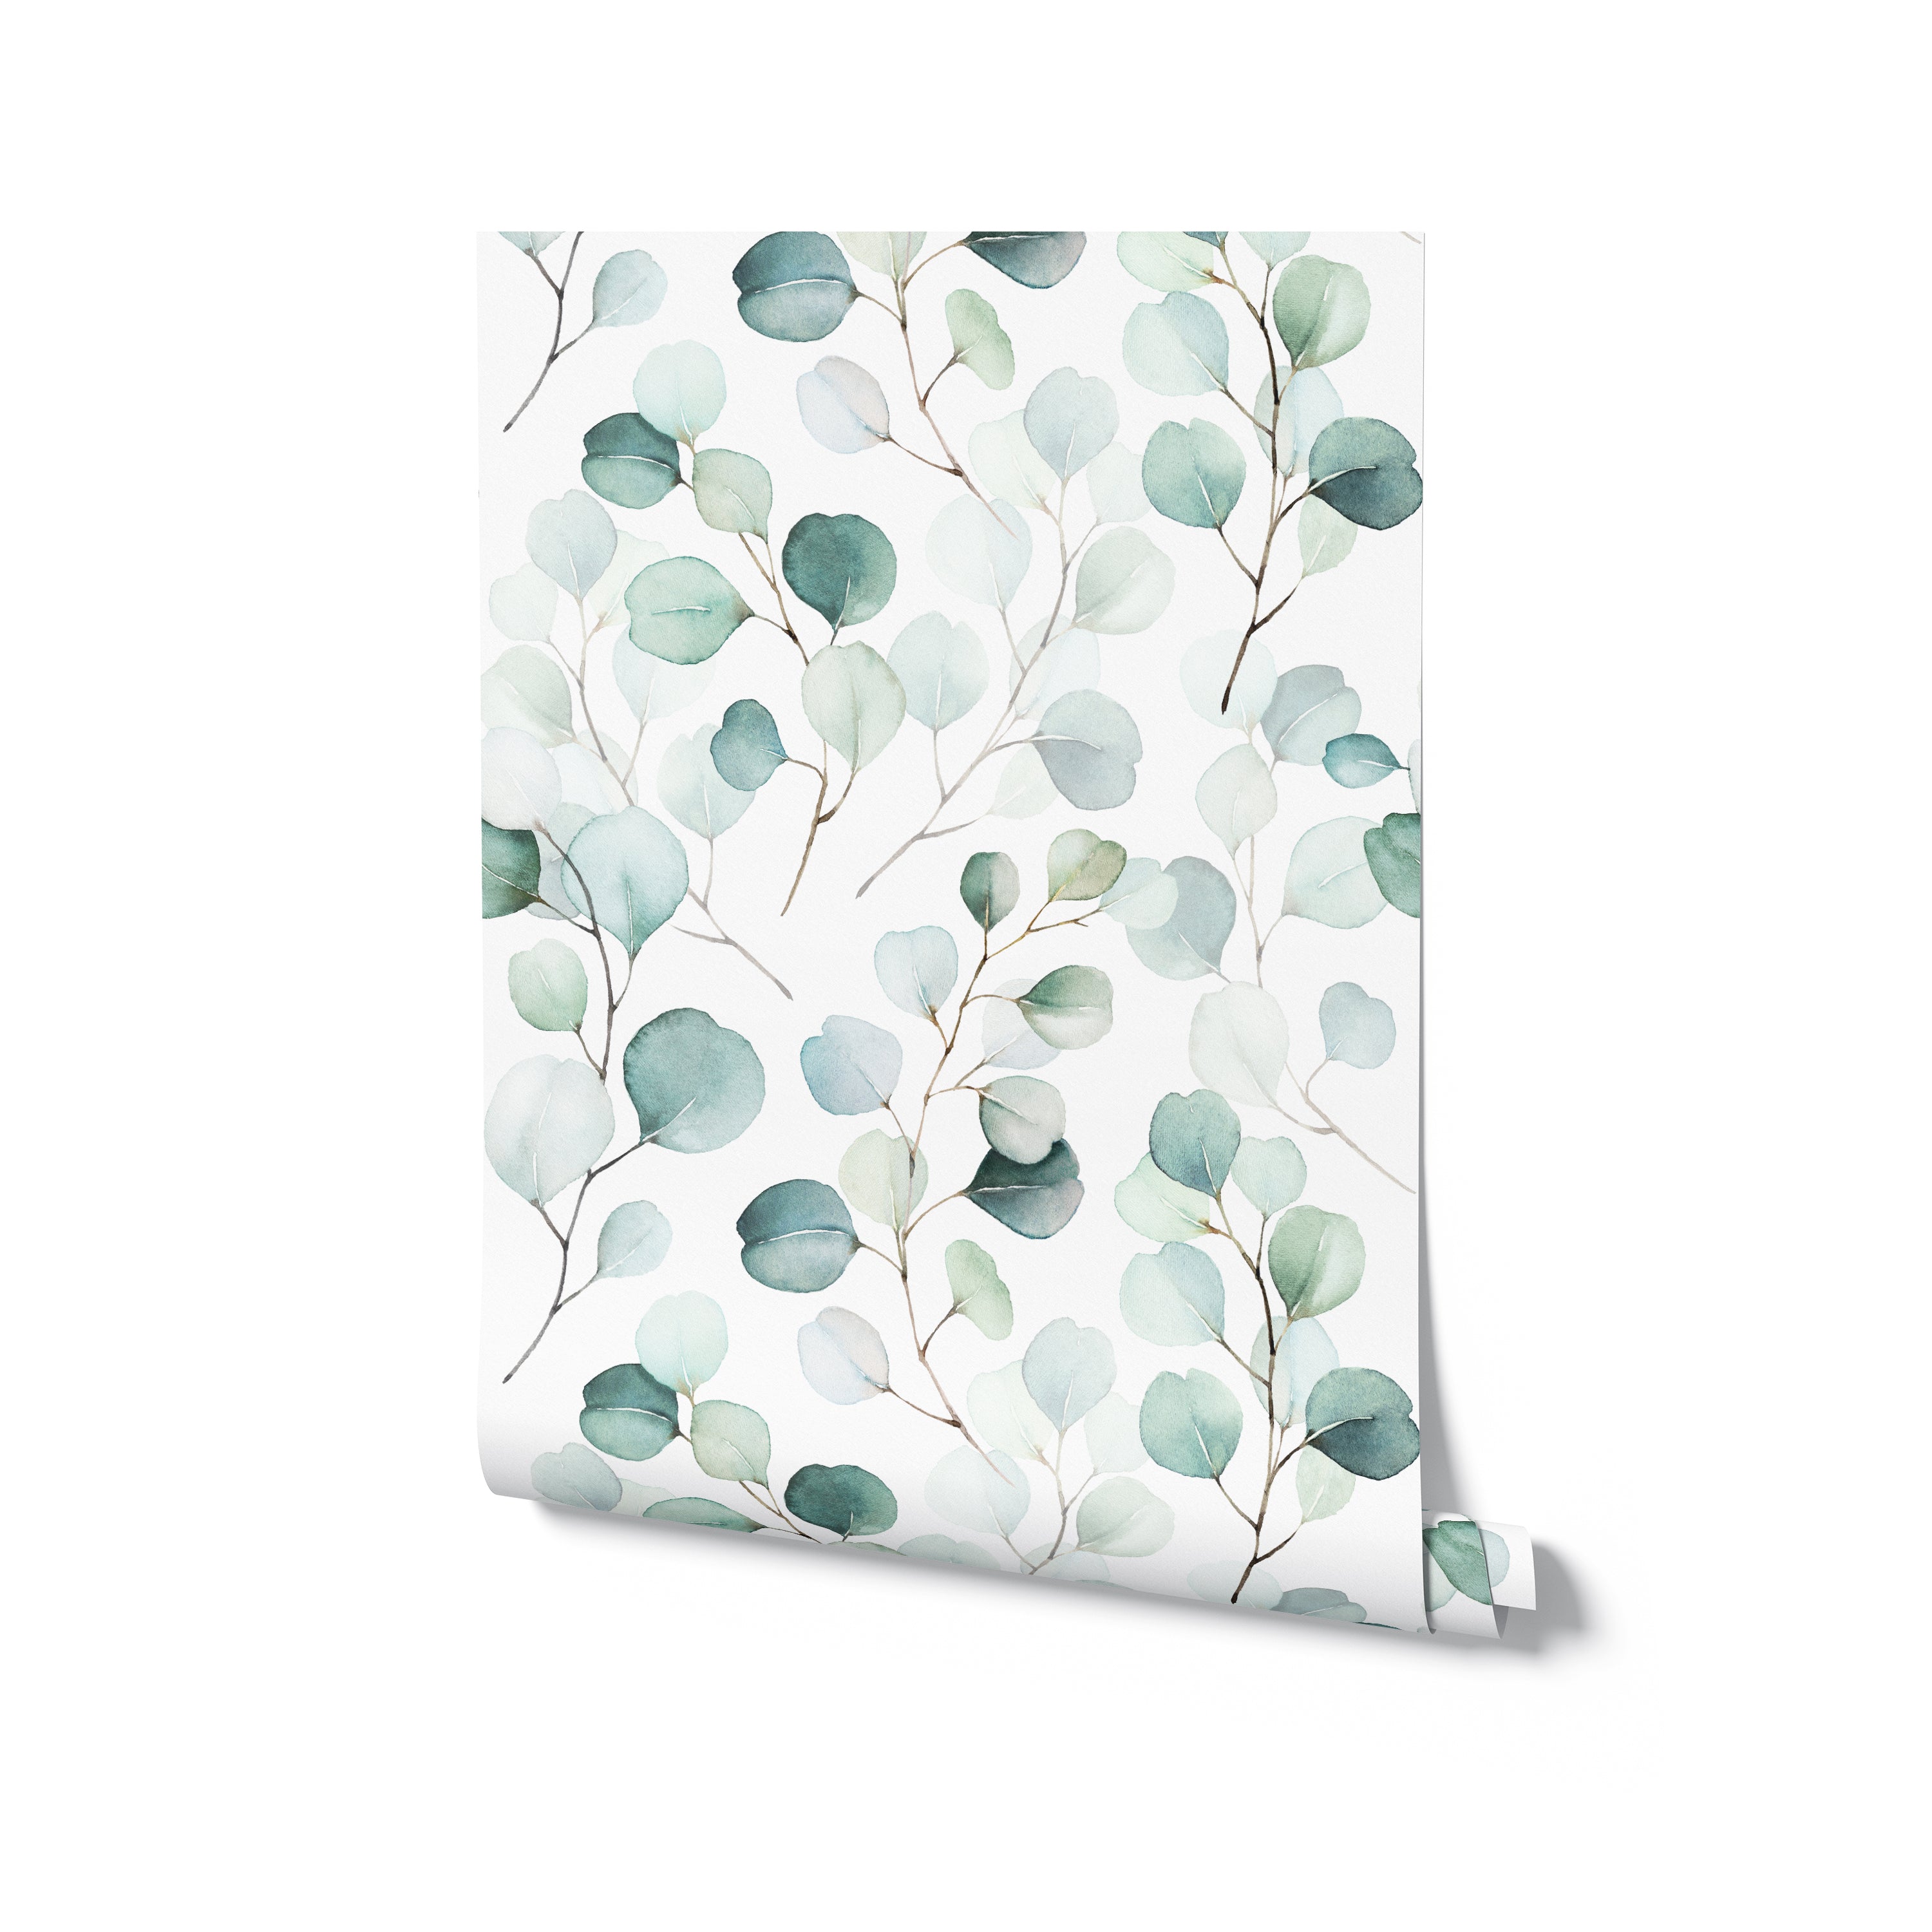 Rolled sample of Eucalyptus Wallpaper II revealing the delicate and artistic rendering of eucalyptus branches and leaves in watercolor style.